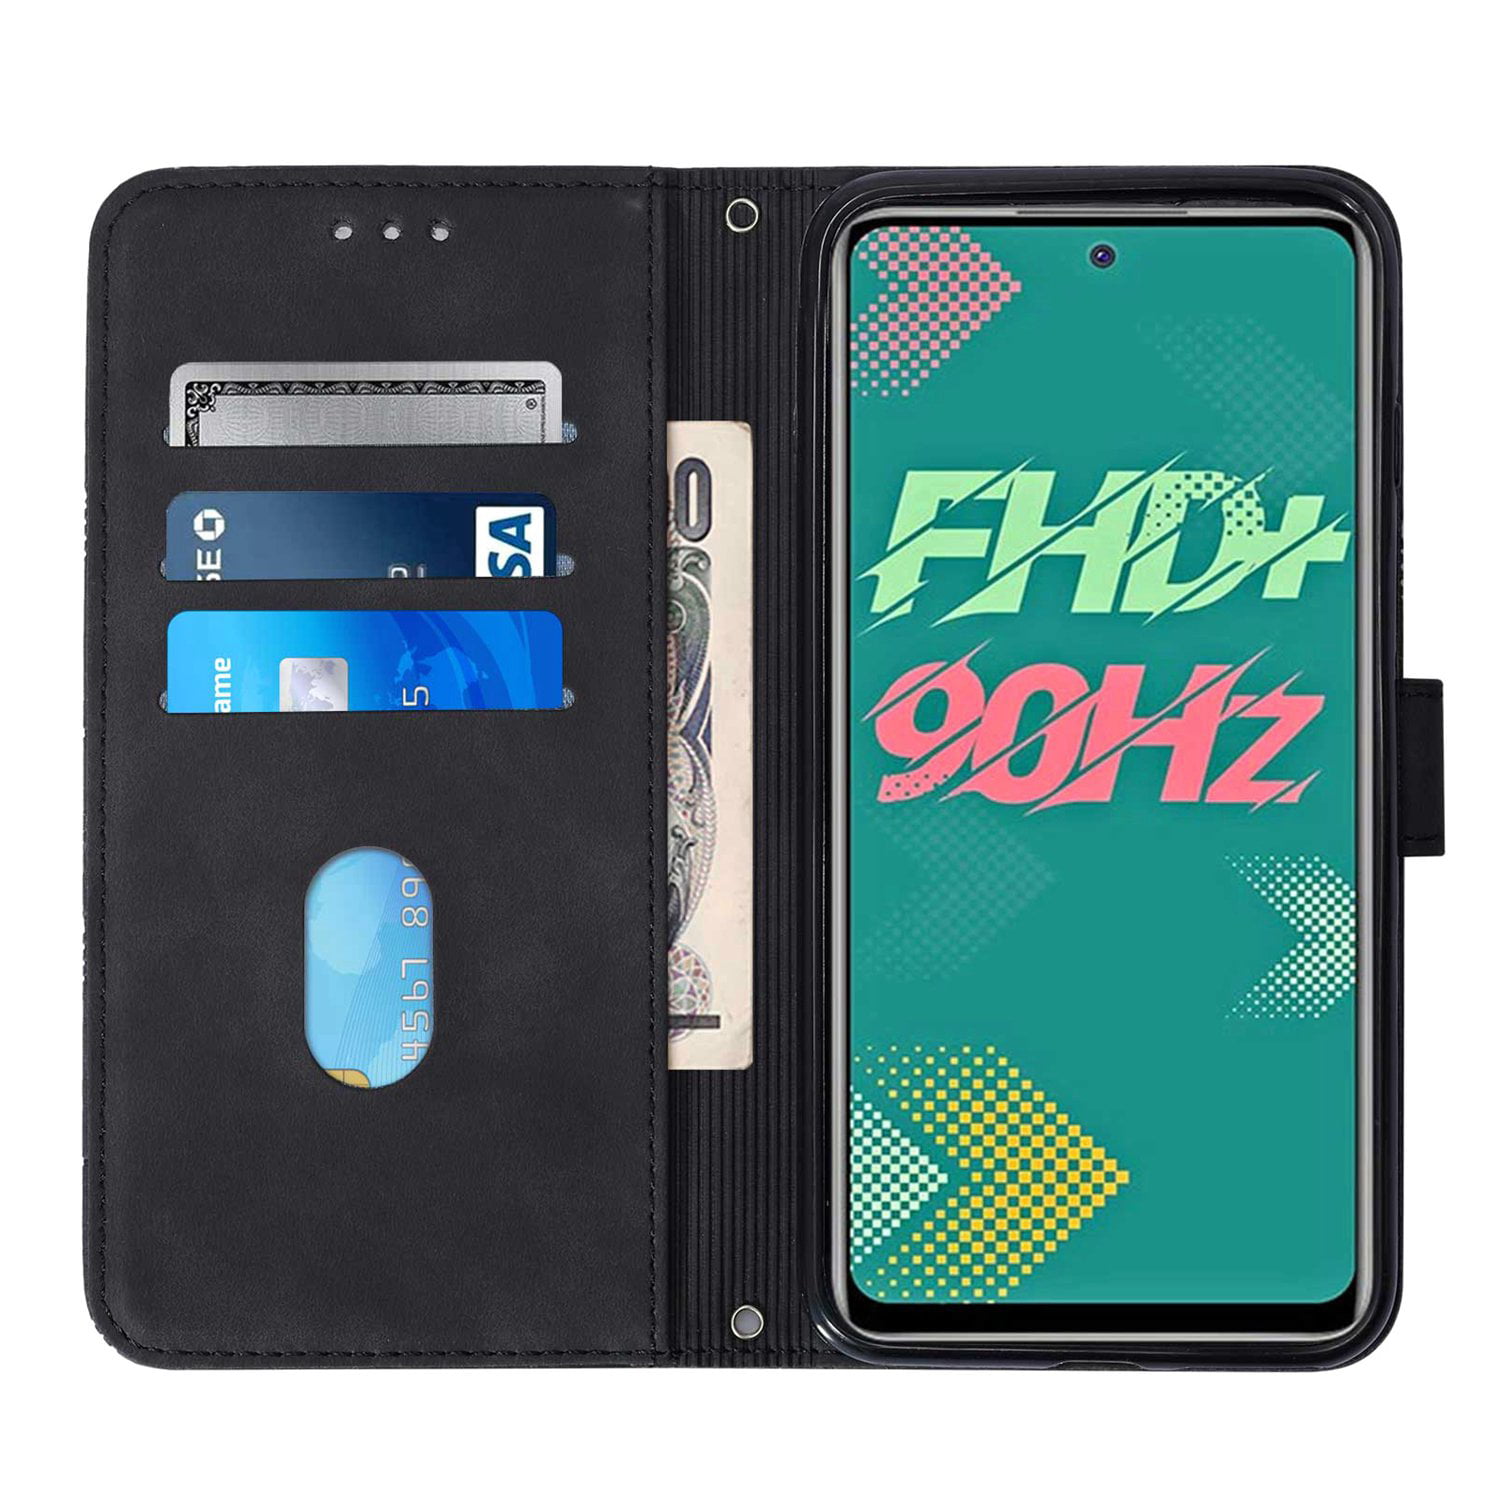 WATERPROOF FLOATING DRY BAG POUCH CASE MONEY KEYS CARDS For Infinix Hot 7 